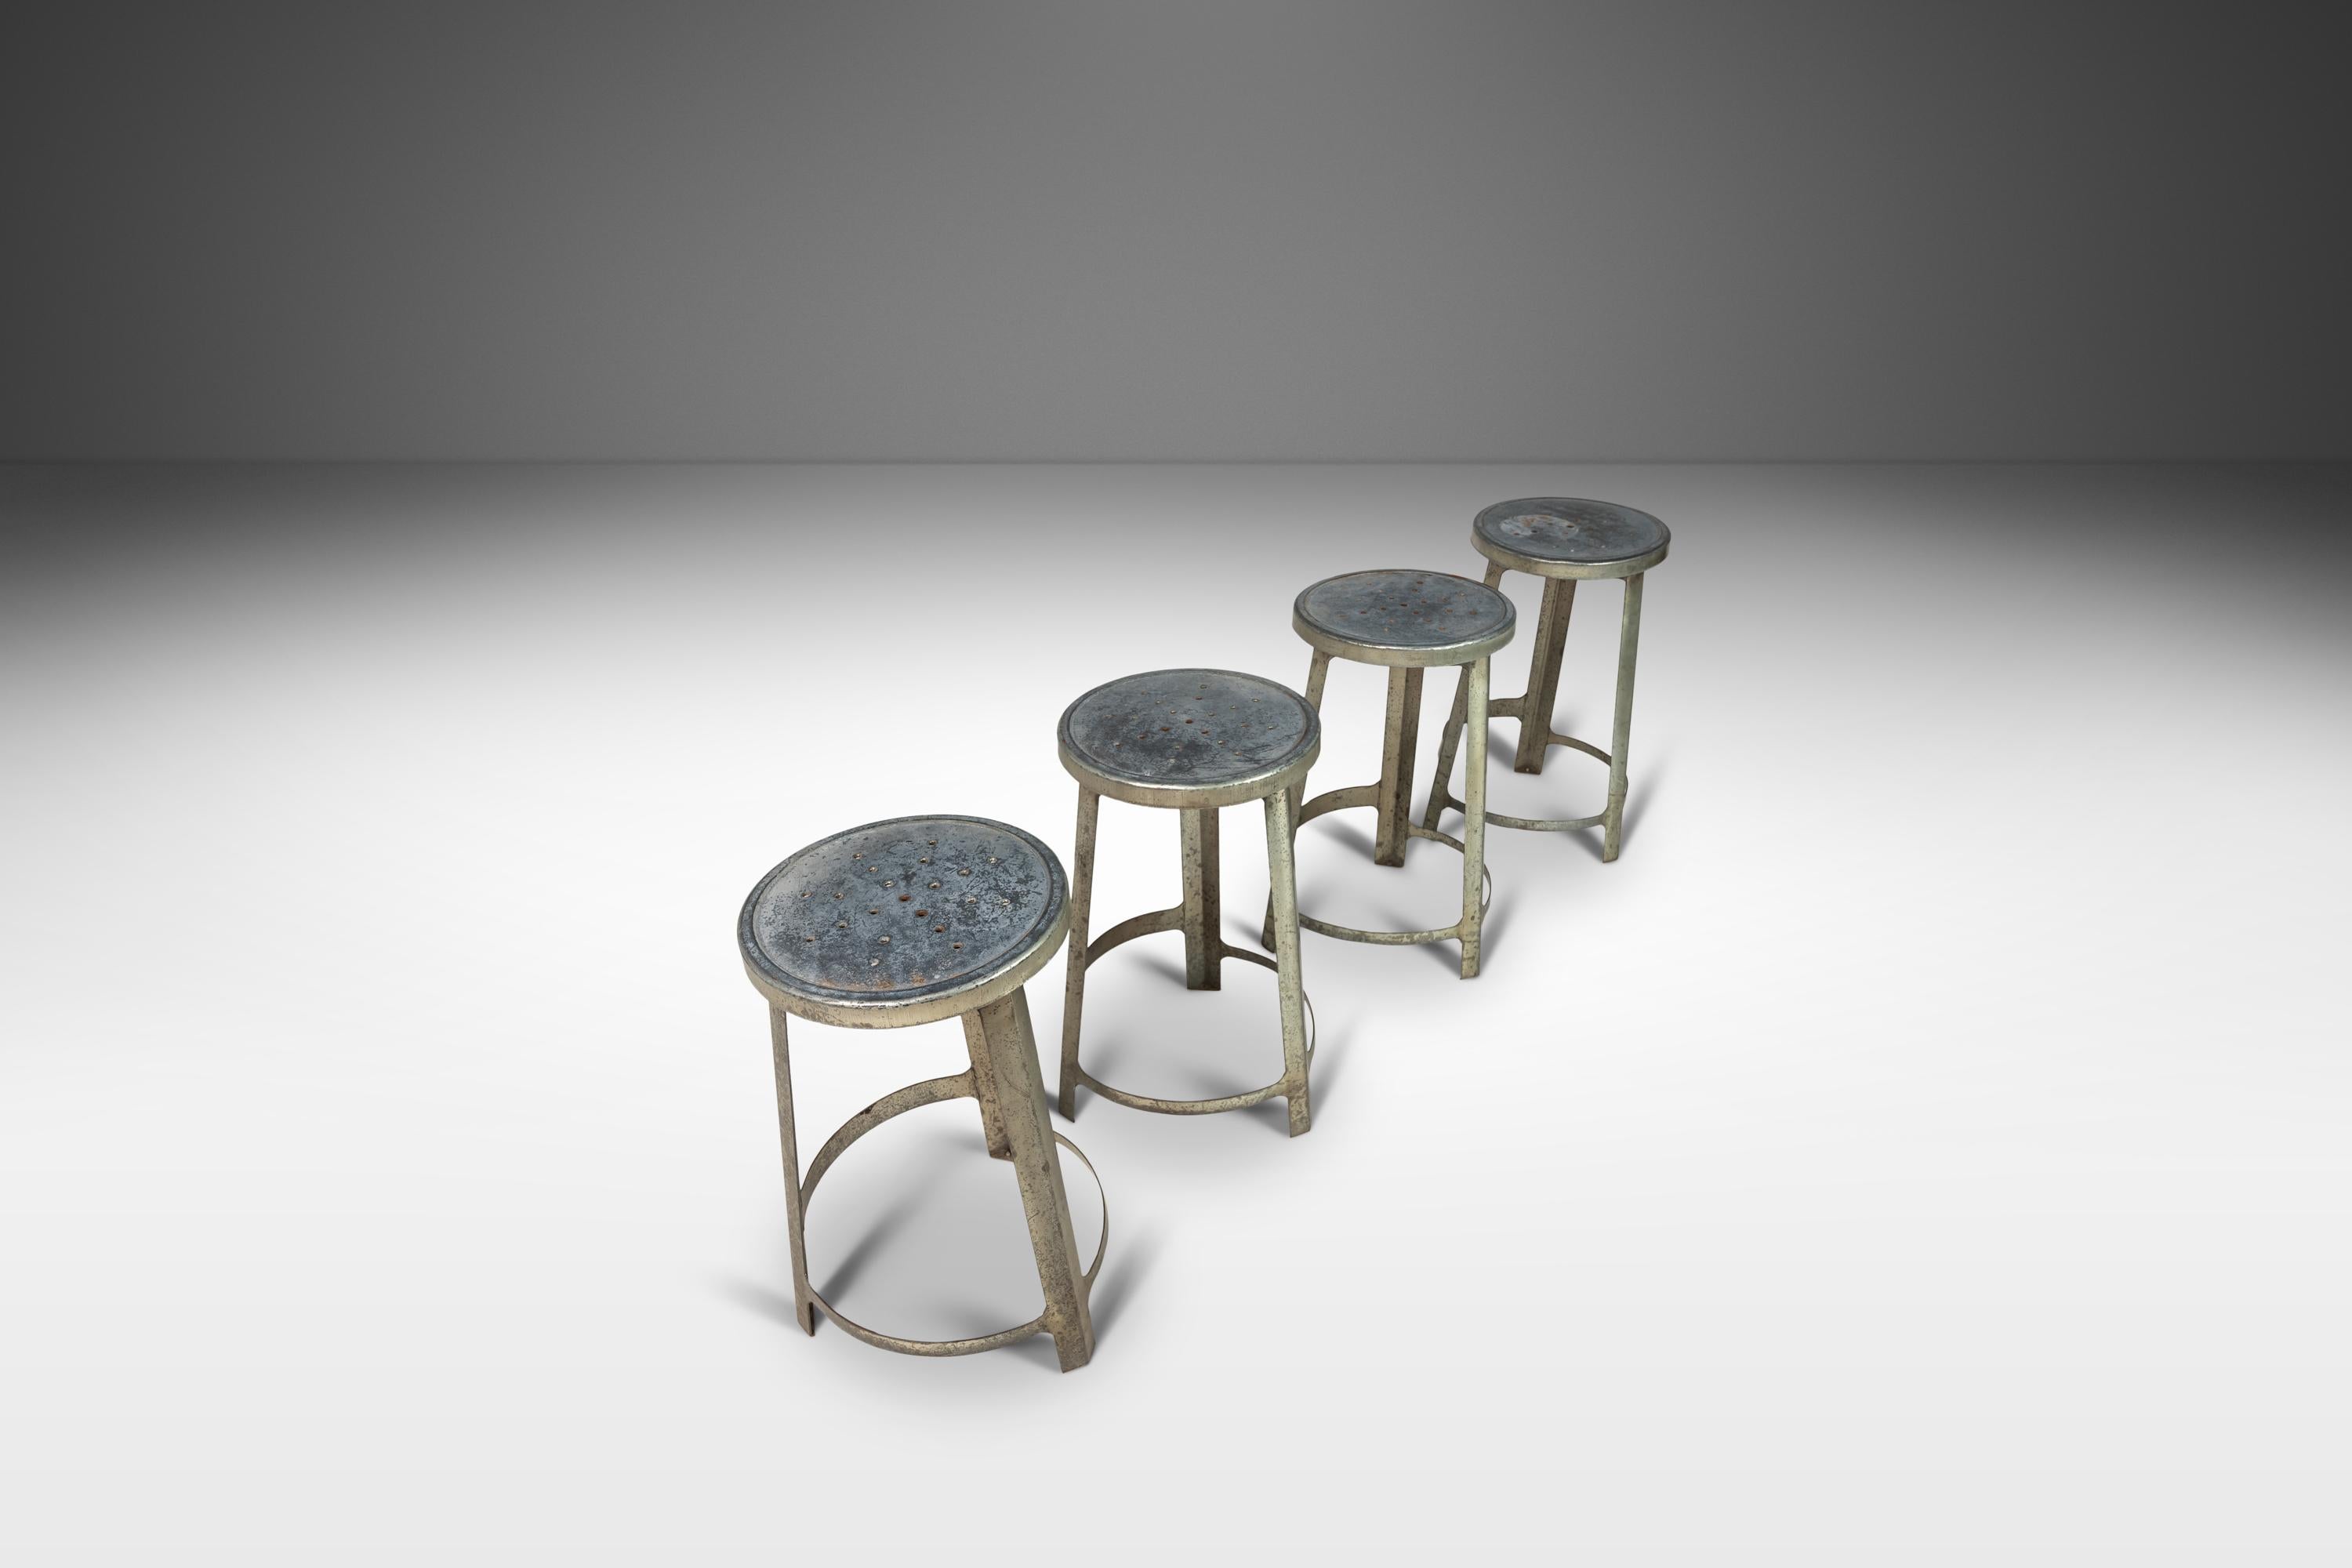 Forged from solid aluminum these exceptional stools were built to last forever. Featuring pierced metal seats, intricate welds and sharp modern angles this set is perfect for collectors and designers alike and are ideal for studio or gallery spaces.